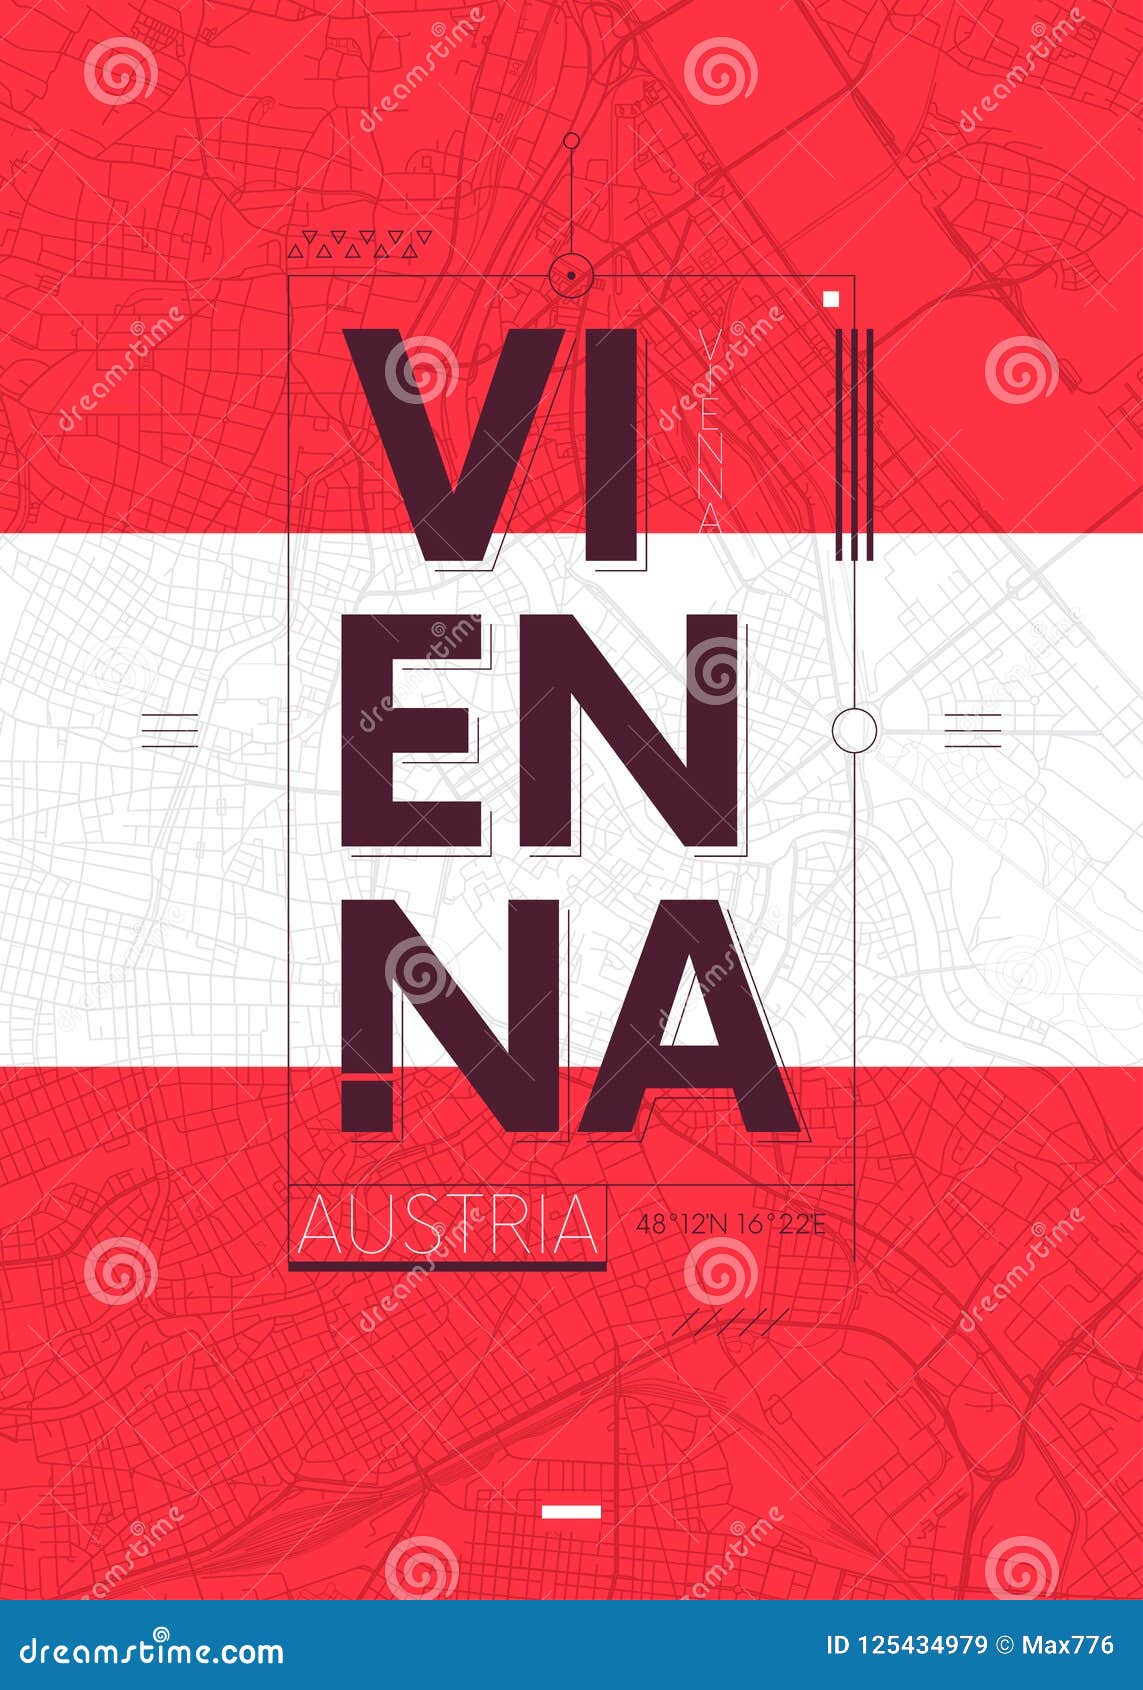 Typography Graphics Color Poster With A Map Of Vienna